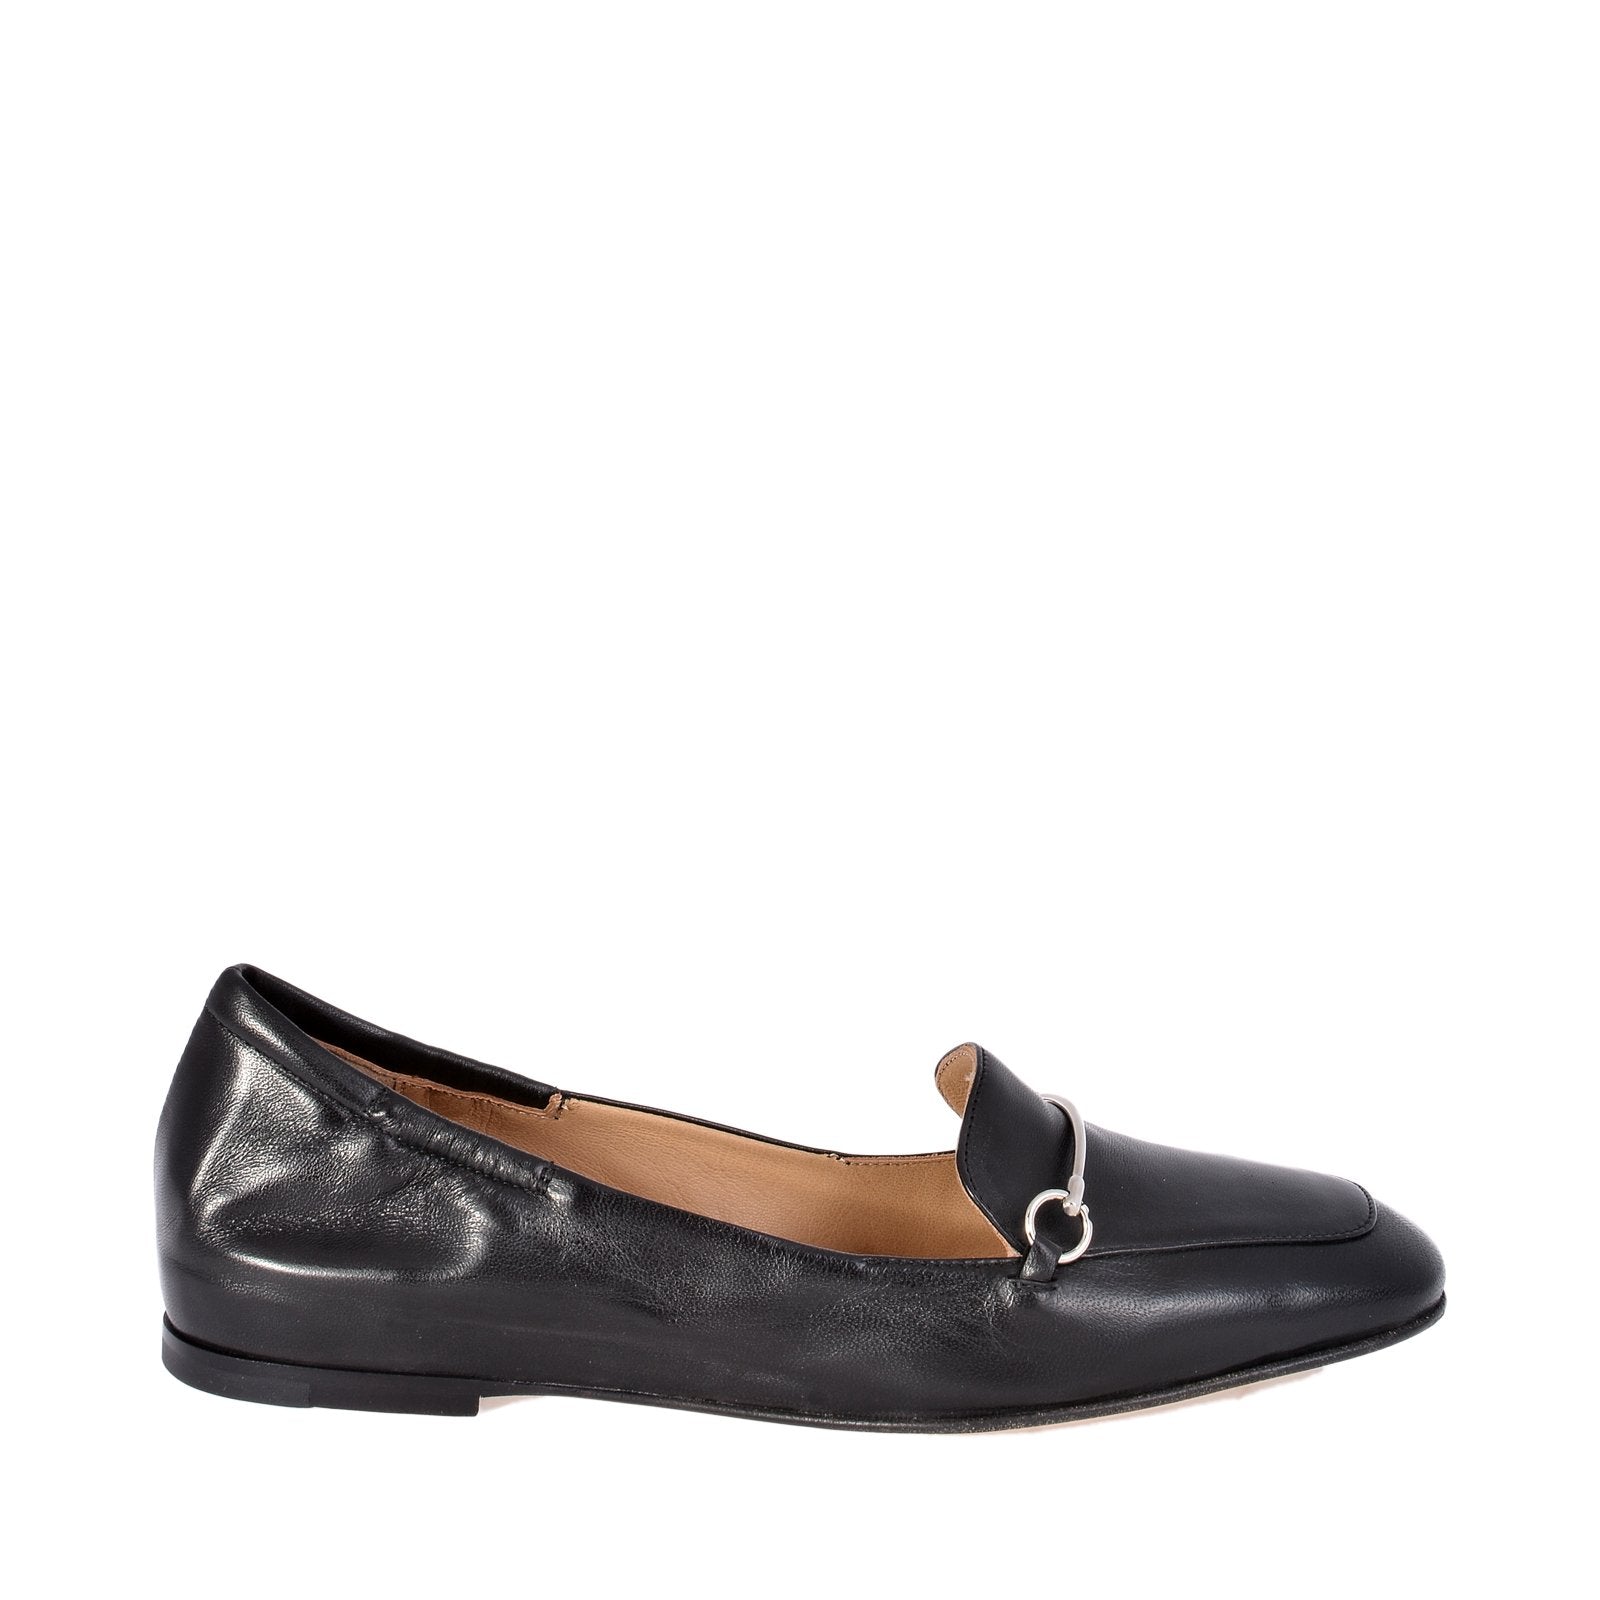 Lena Black Leather Loafers Flats 1144A - 1